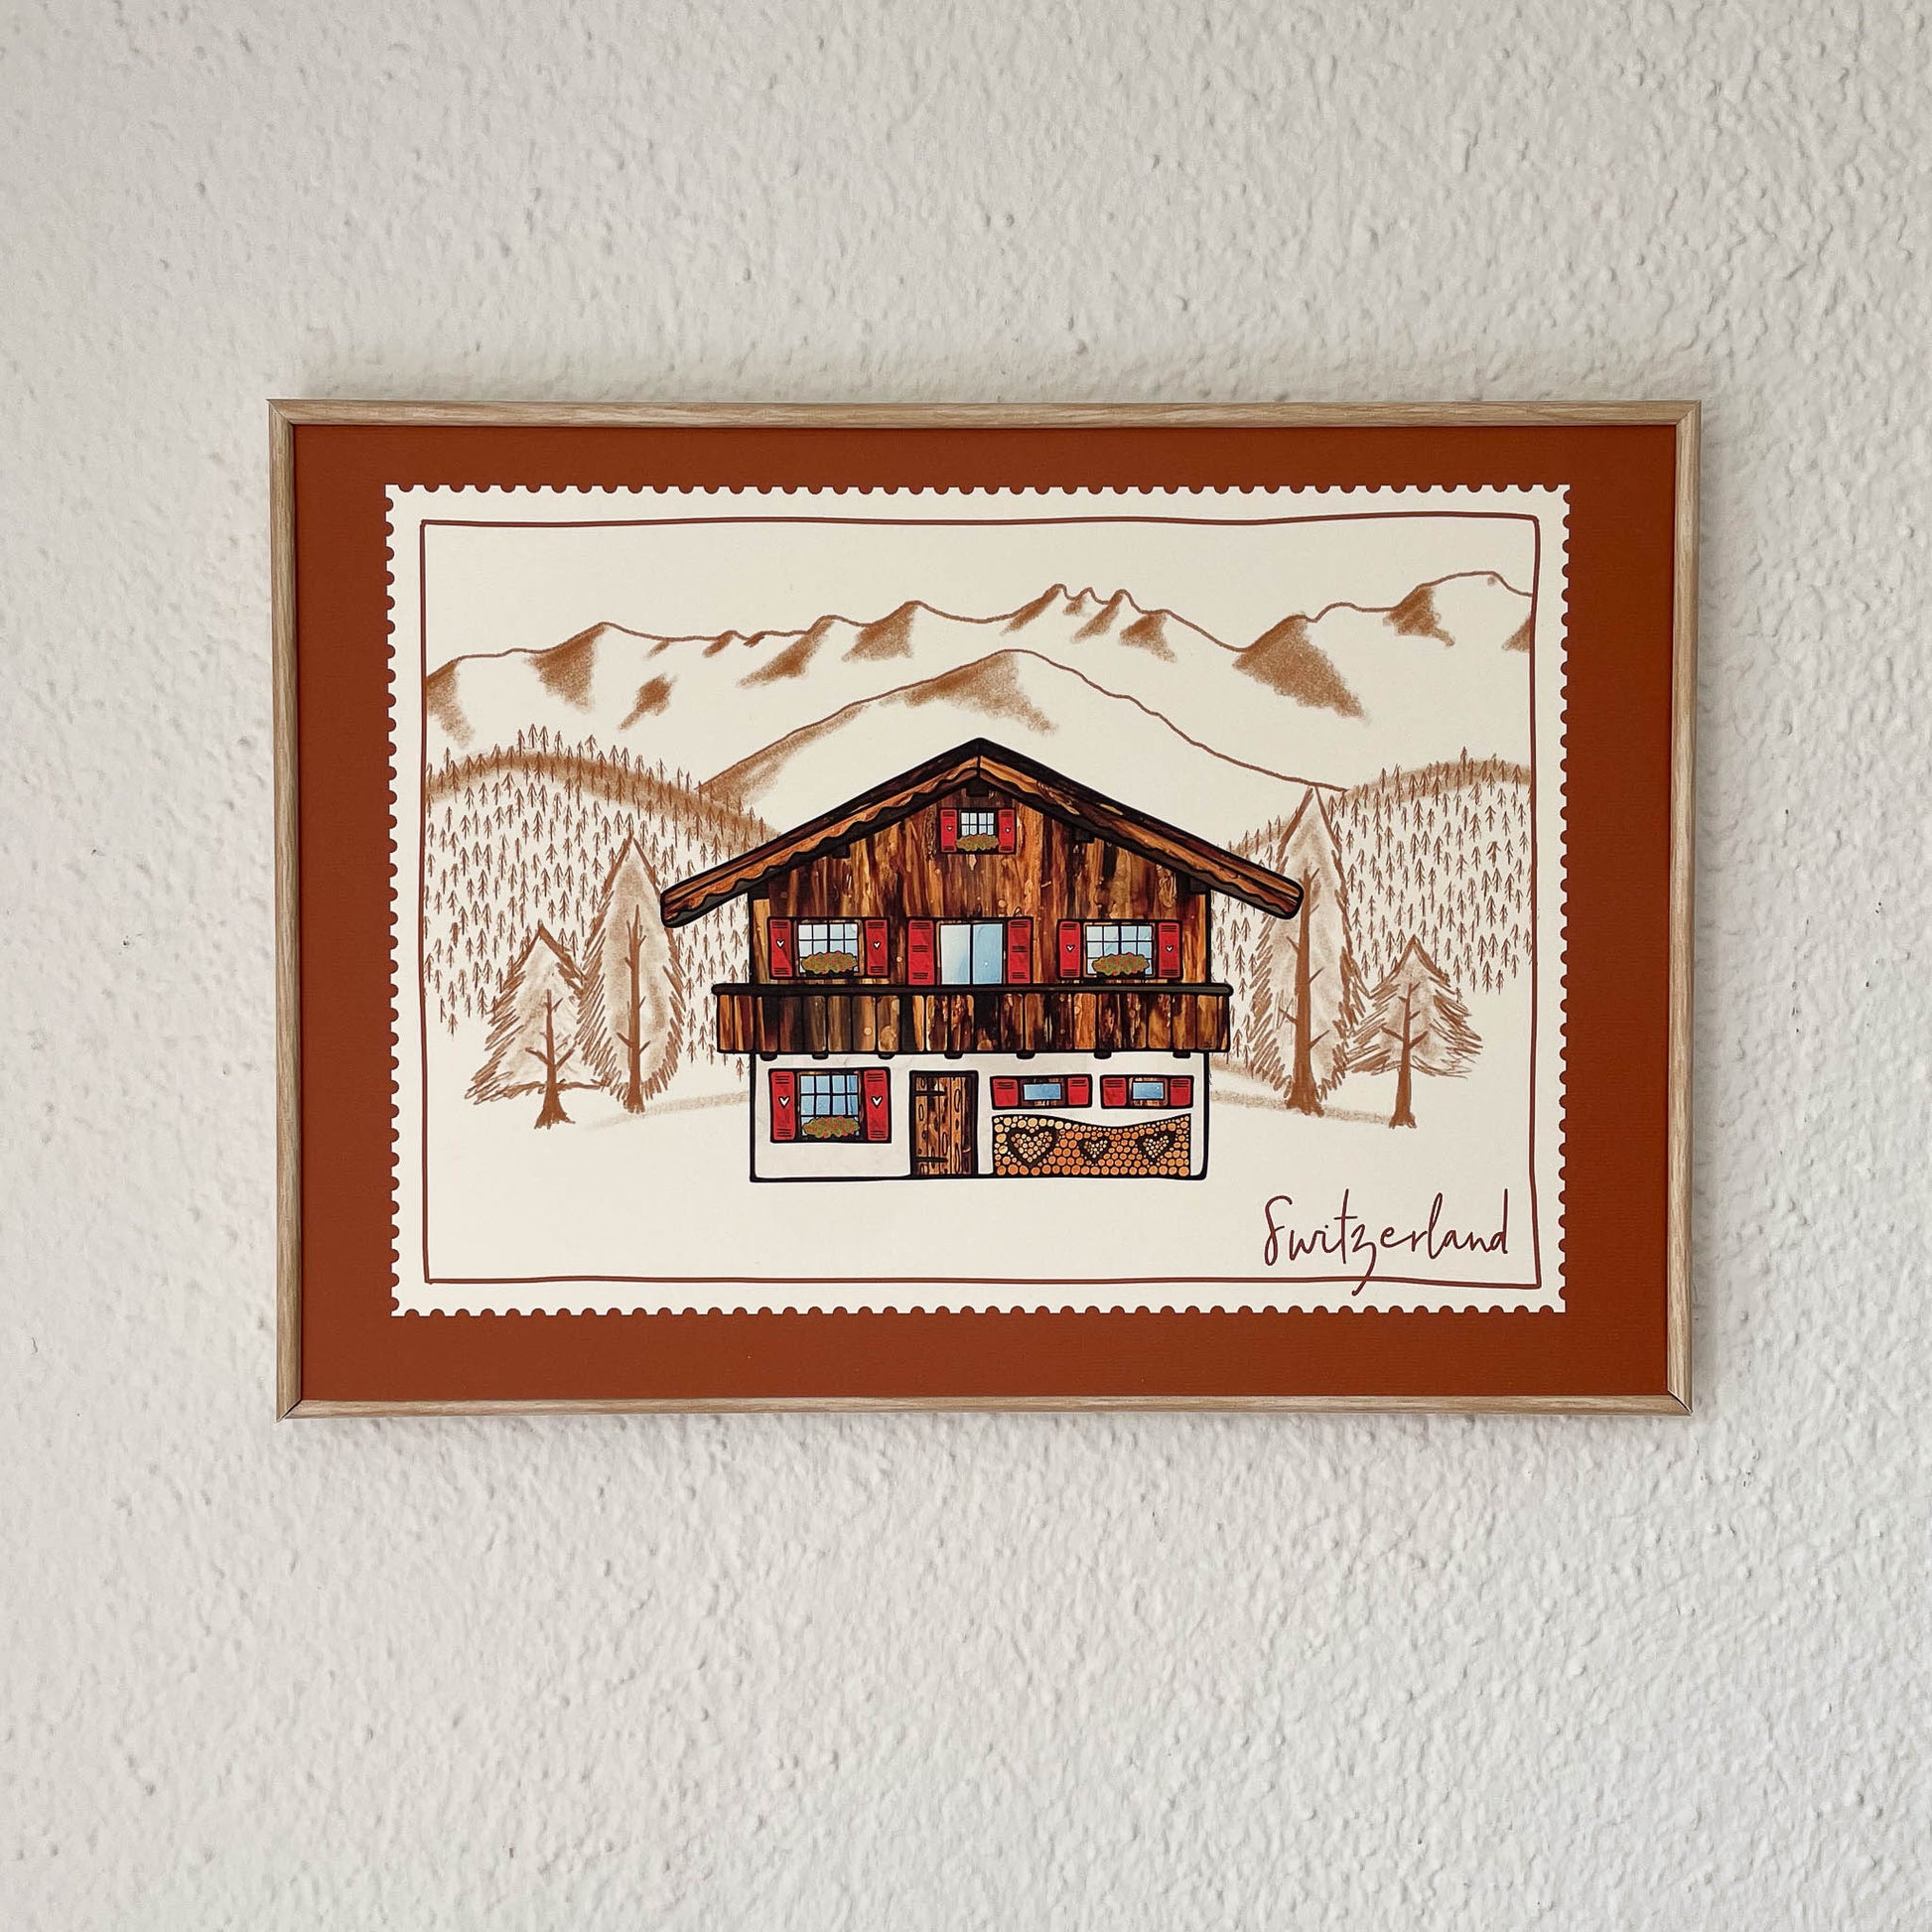 Thoughtful gift idea: Chalet Dreams print showcasing the breathtaking beauty of the Swiss Alps, ideal for Swiss expats missing their homeland.